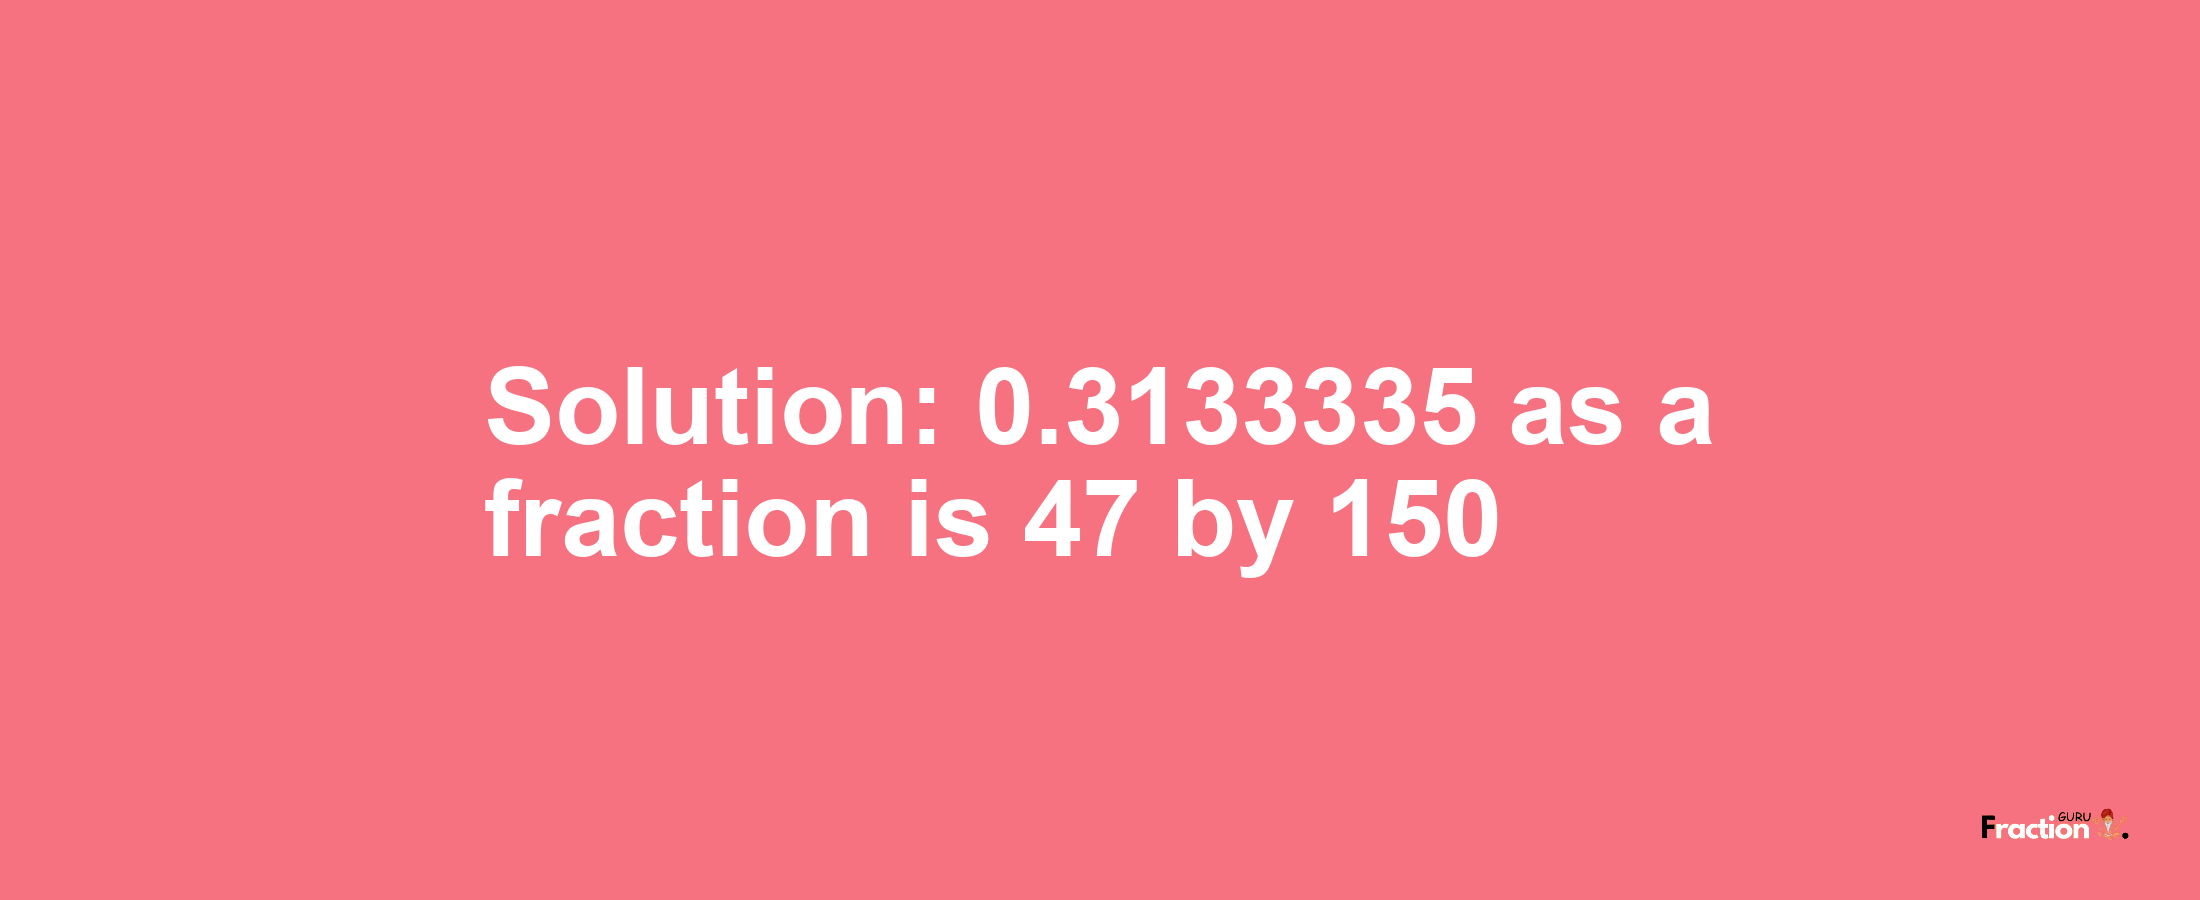 Solution:0.3133335 as a fraction is 47/150